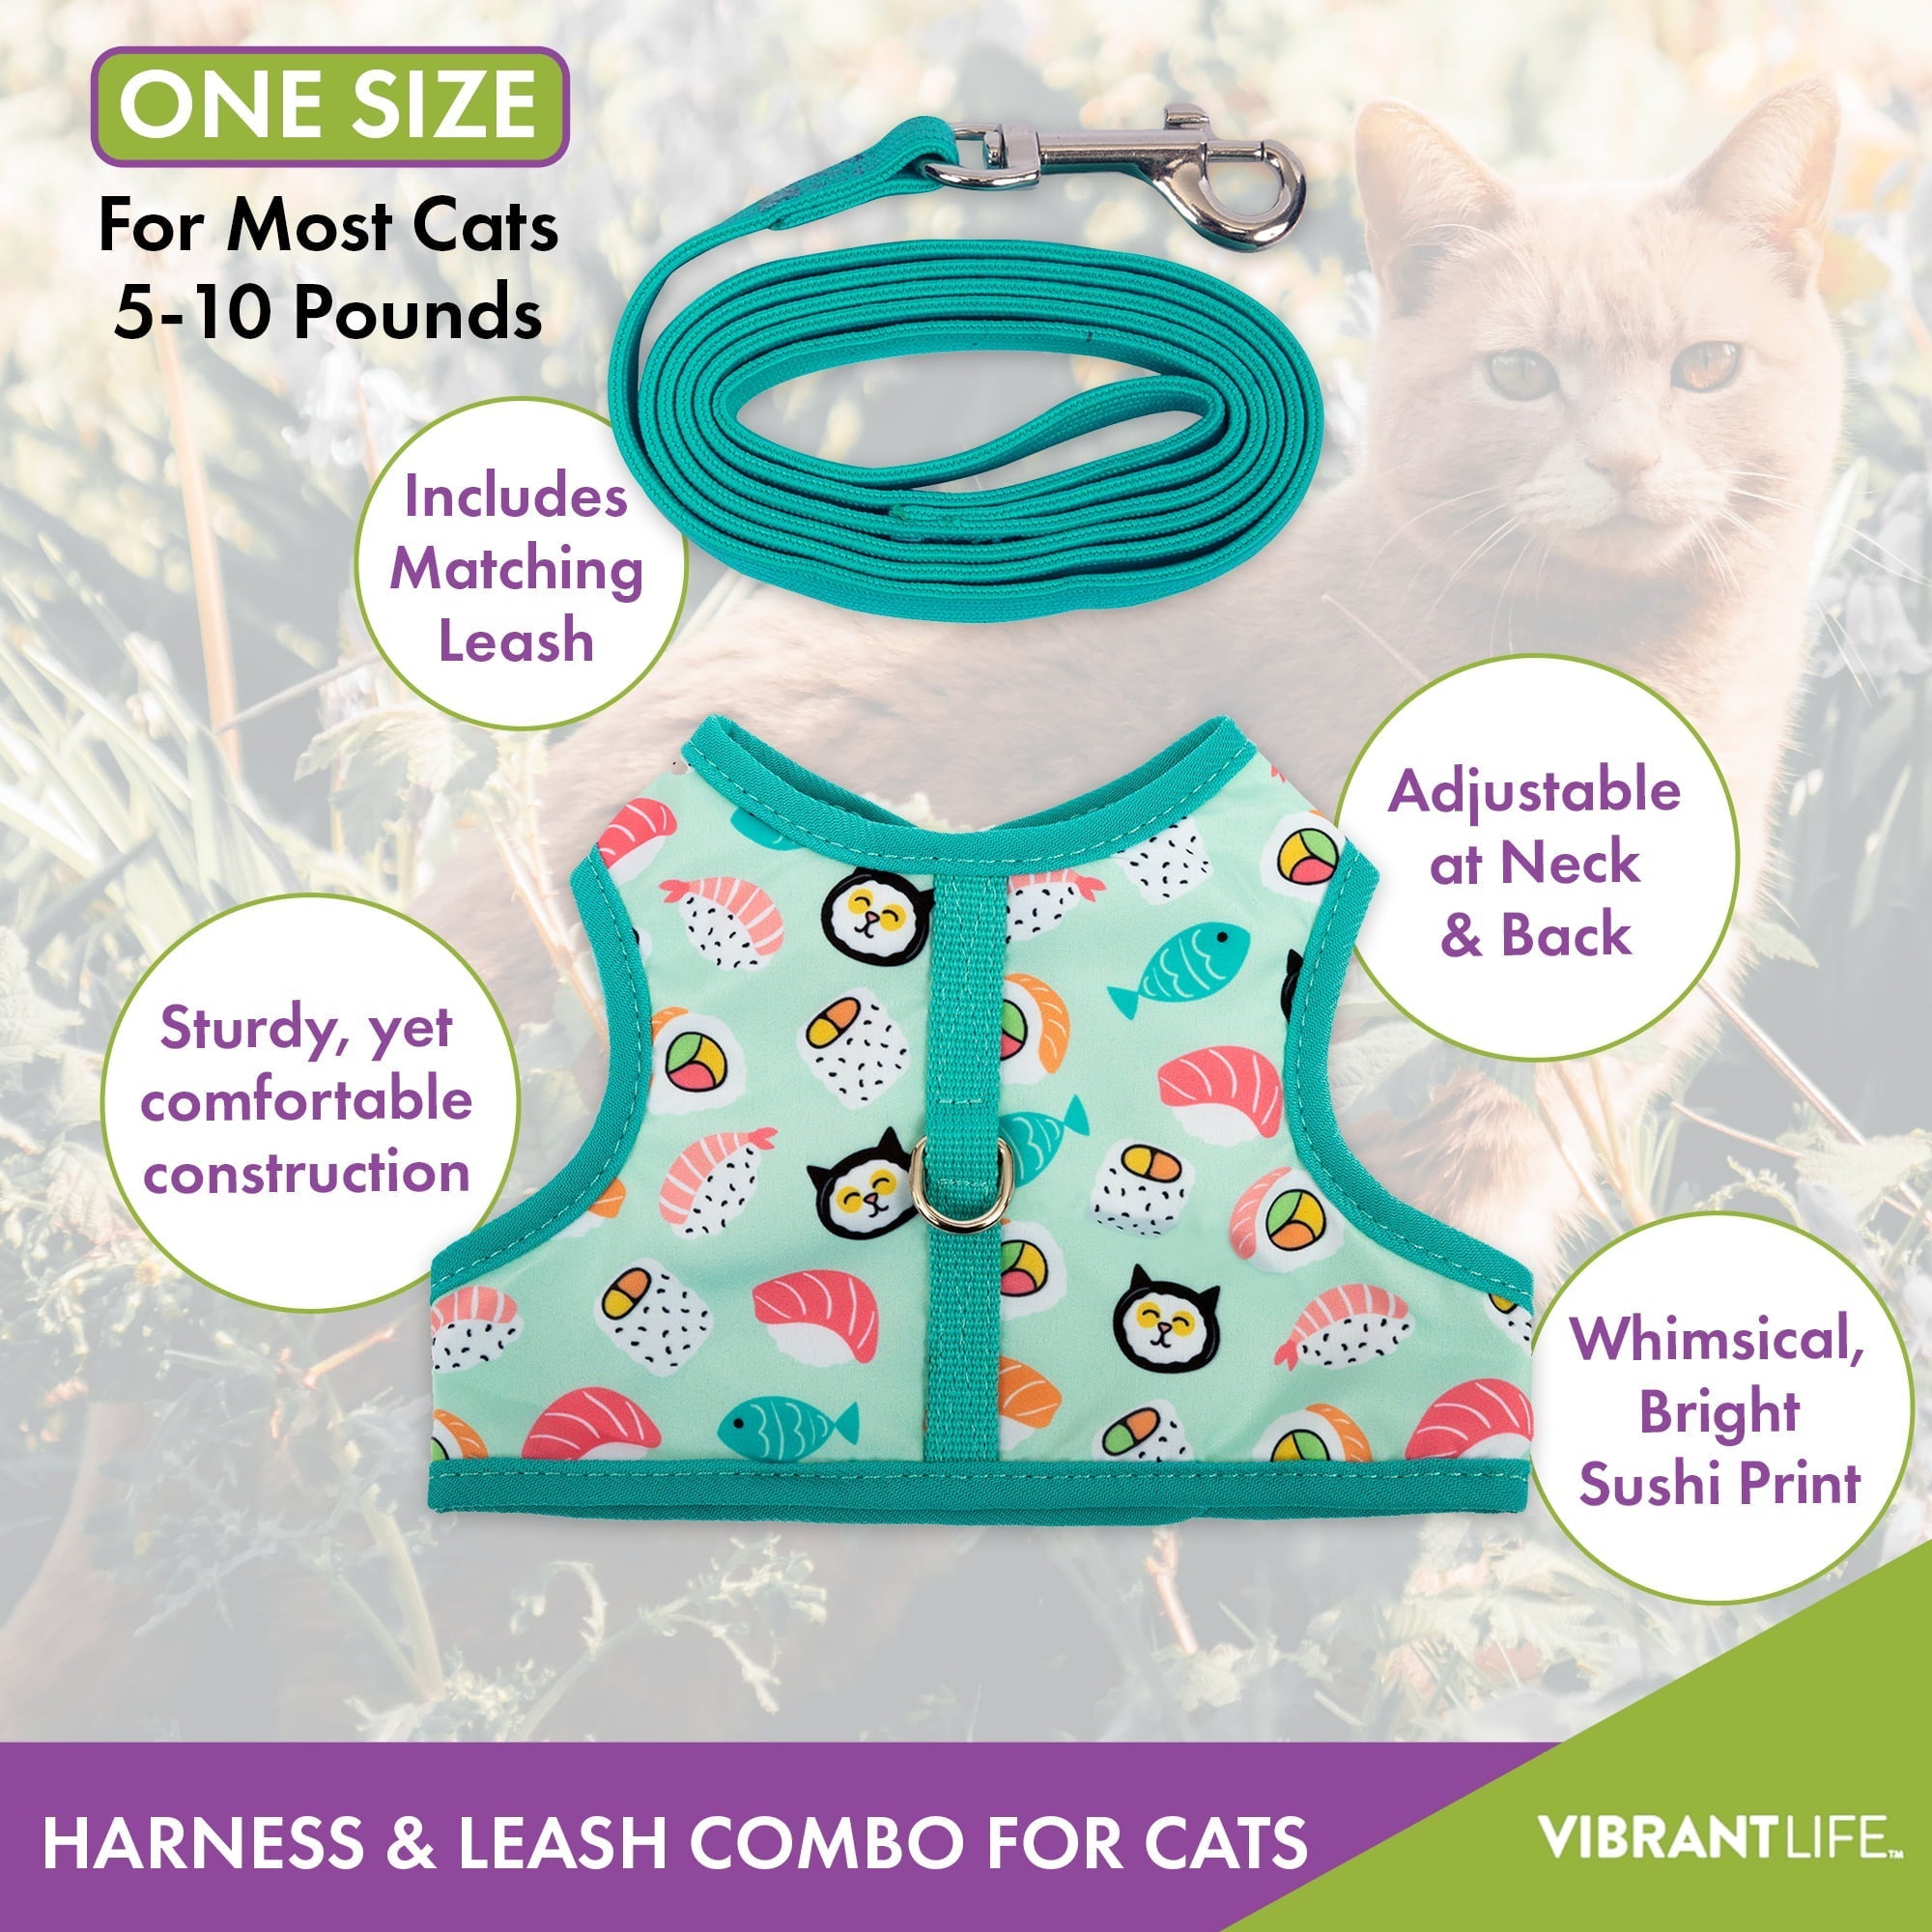 Wholesale prices with free shipping all over United States Vibrant Life Polyester Sushi Walking Cat Harness, Teal, One Size (12